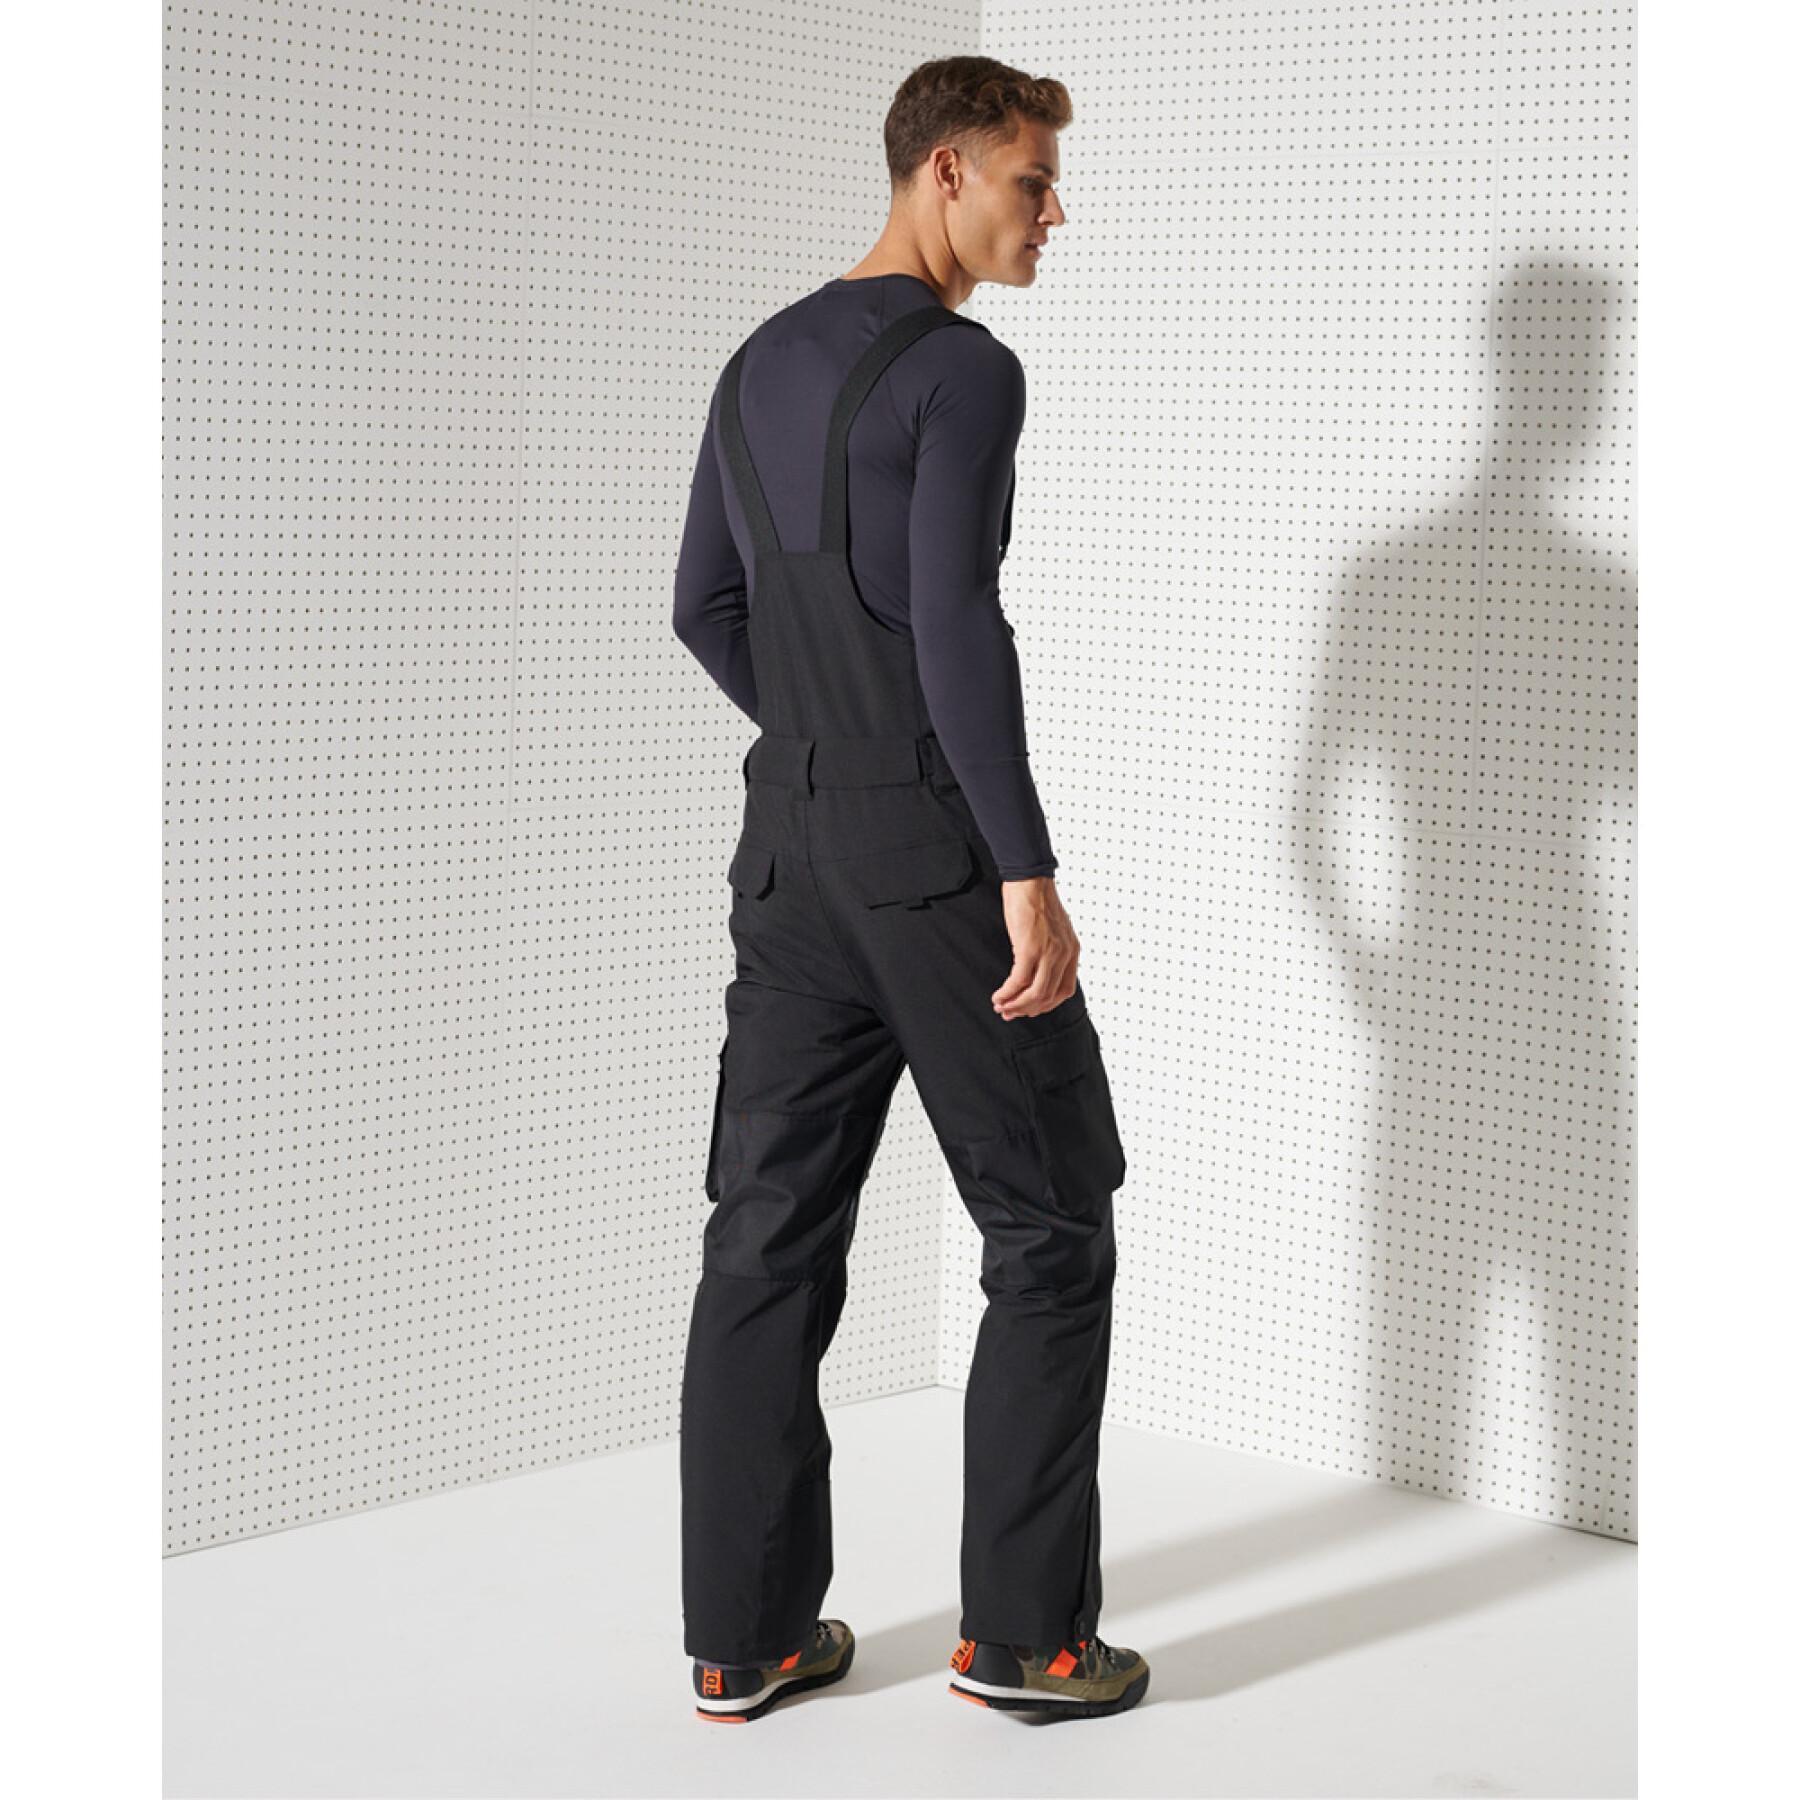 Skidoverall Superdry Carpenter